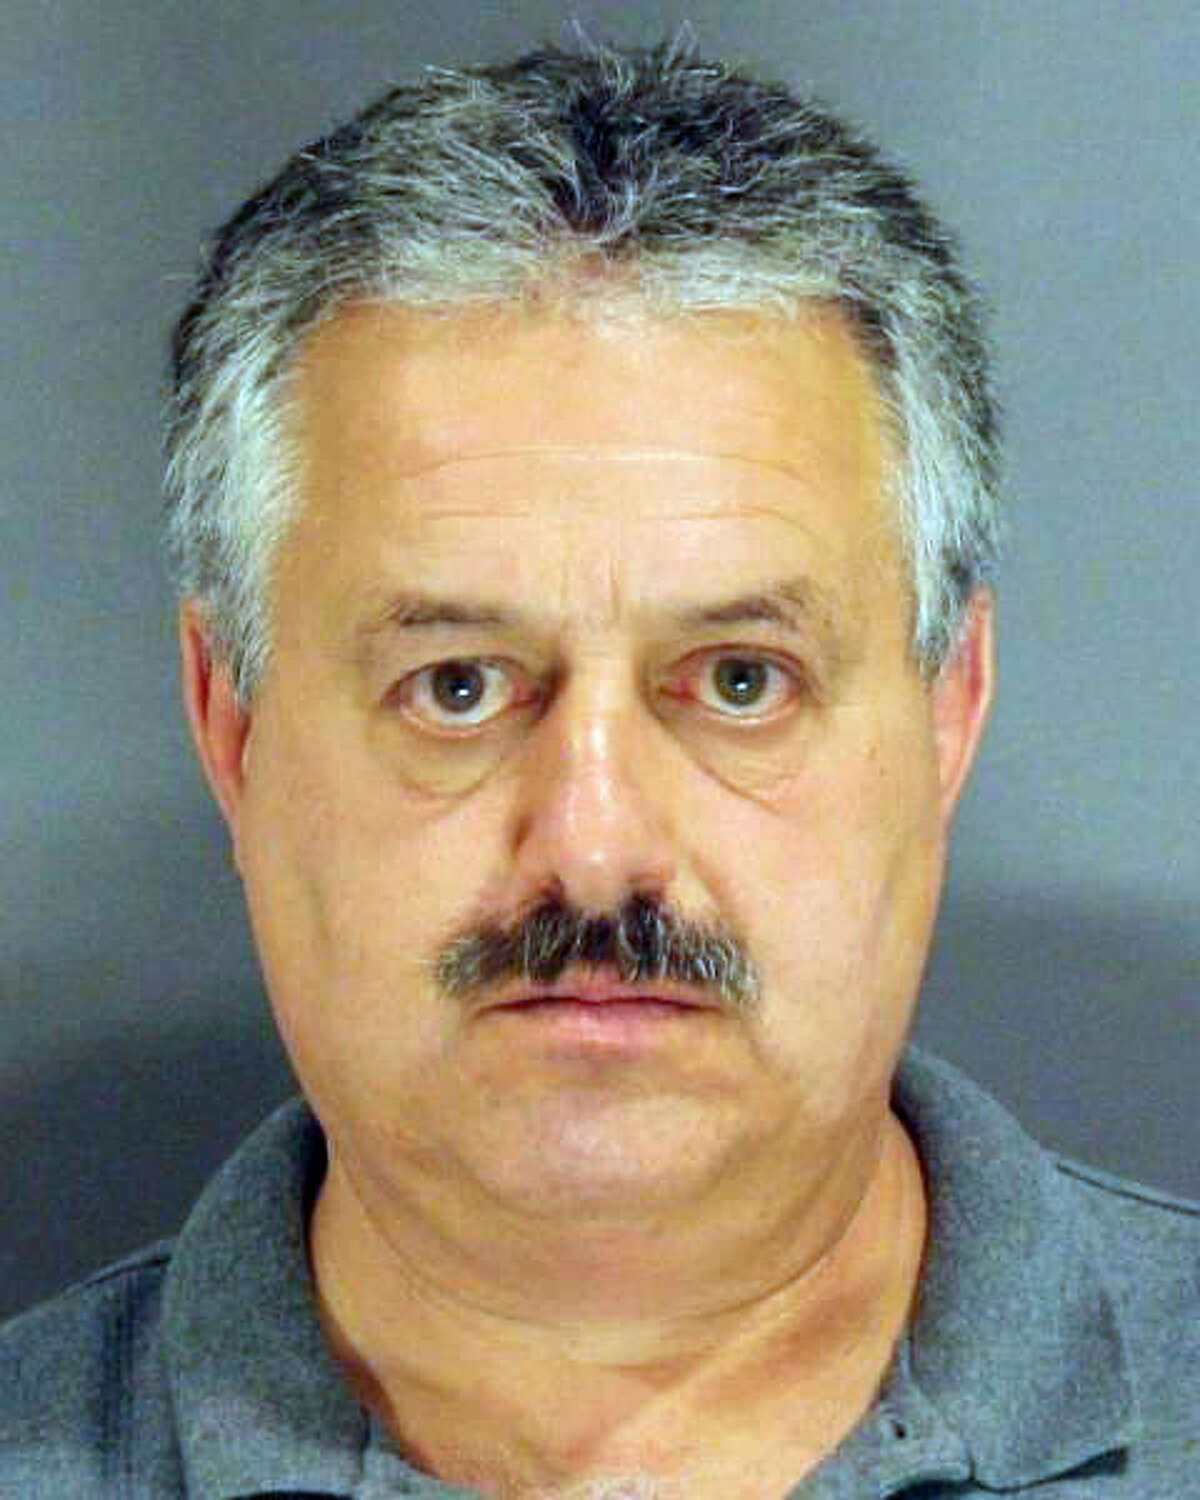 Arrested Saturday morning ( April 28, 2012)and held since that time, Michael Balba (D.O.B. 3/1/57) was arraigned today on four counts of perjury for allegedly lying repeatedly to the Suffolk County Grand Jury as it investigated Rebecca Payneís May 20, 2008, shooting death.